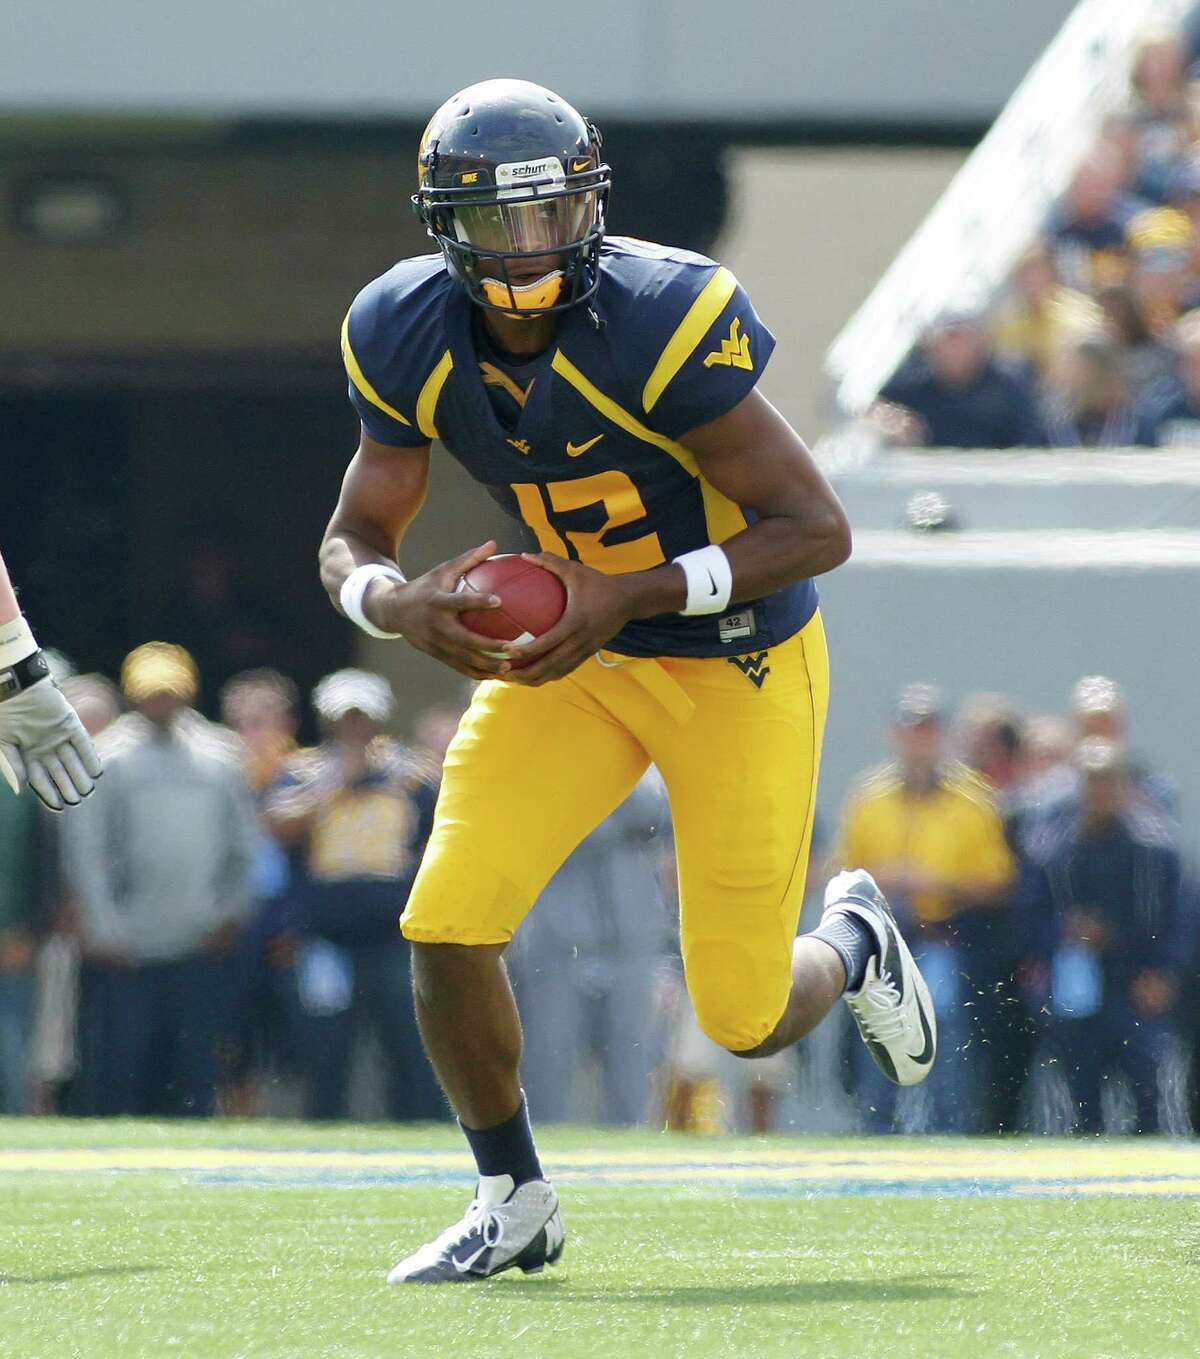 MORGANTOWN, WV - SEPTEMBER 29: Geno Smith #12 of the West Virginia Mountaineers runs the ball against the Baylor Bears during the game on September 29, 2012 at Mountaineer Field in Morgantown, West Virginia.